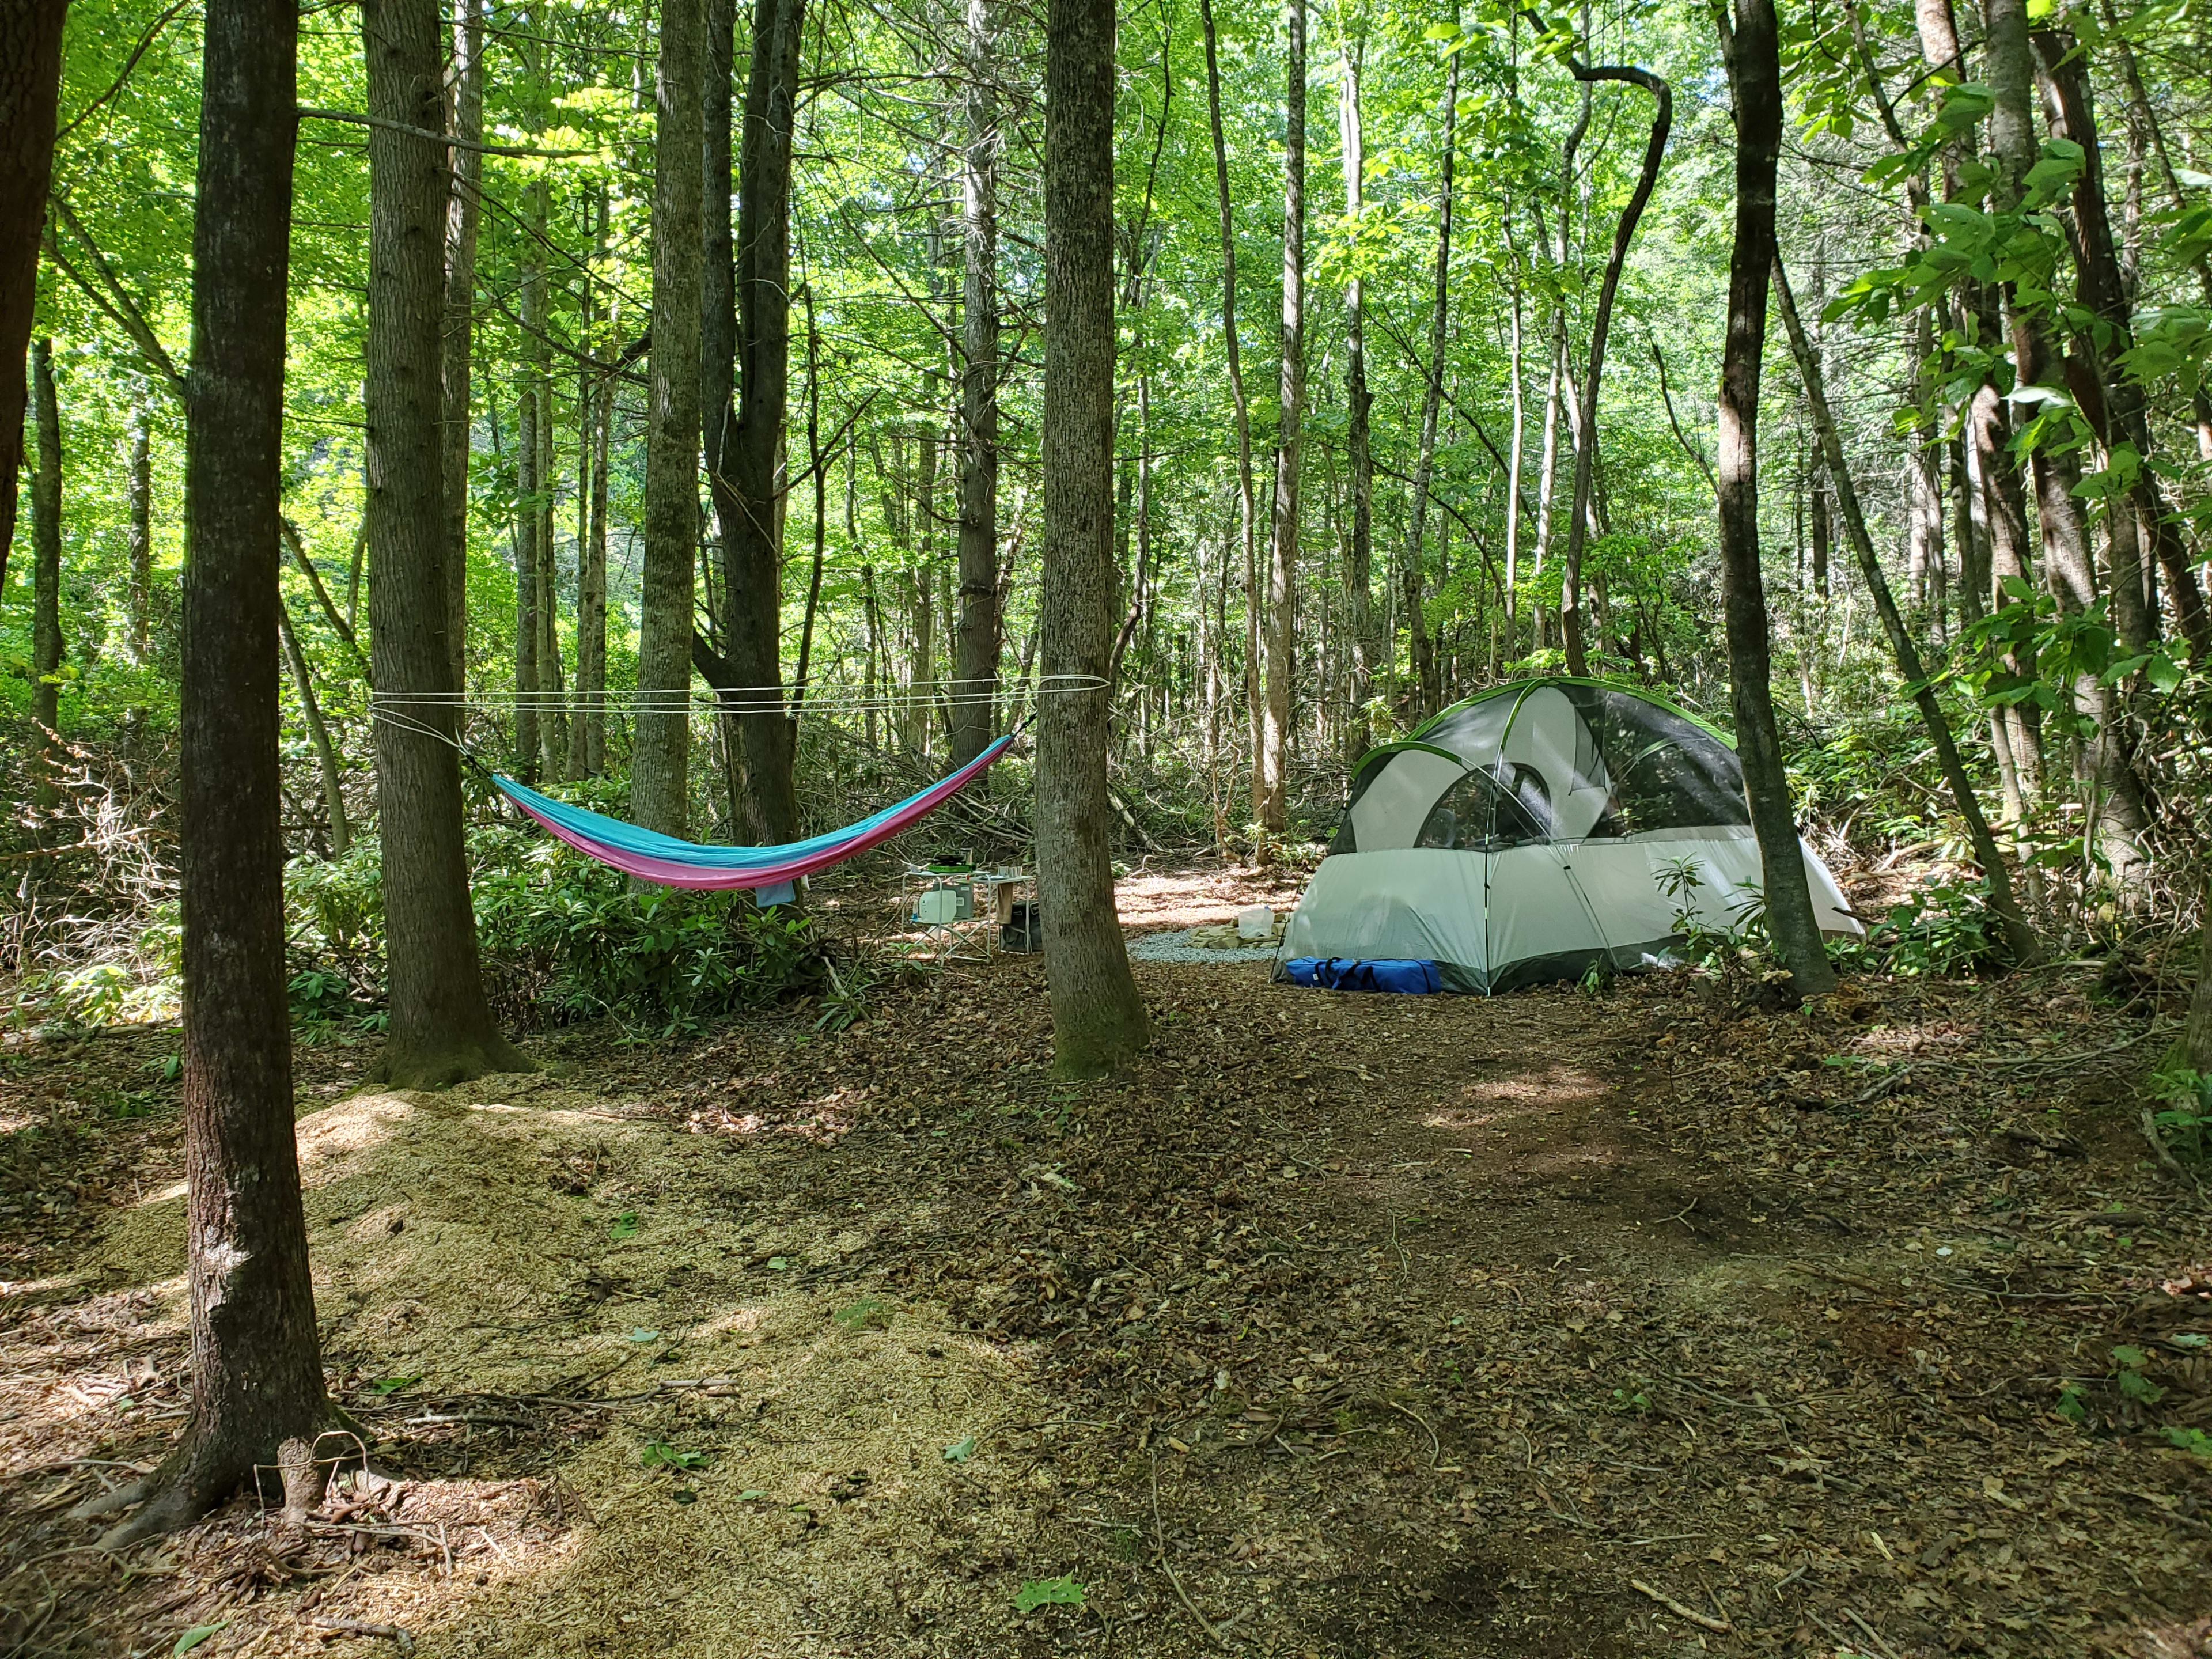 Bring your own tent and camp near the creek and fire pit. The sites are quiet, shady and wooded.